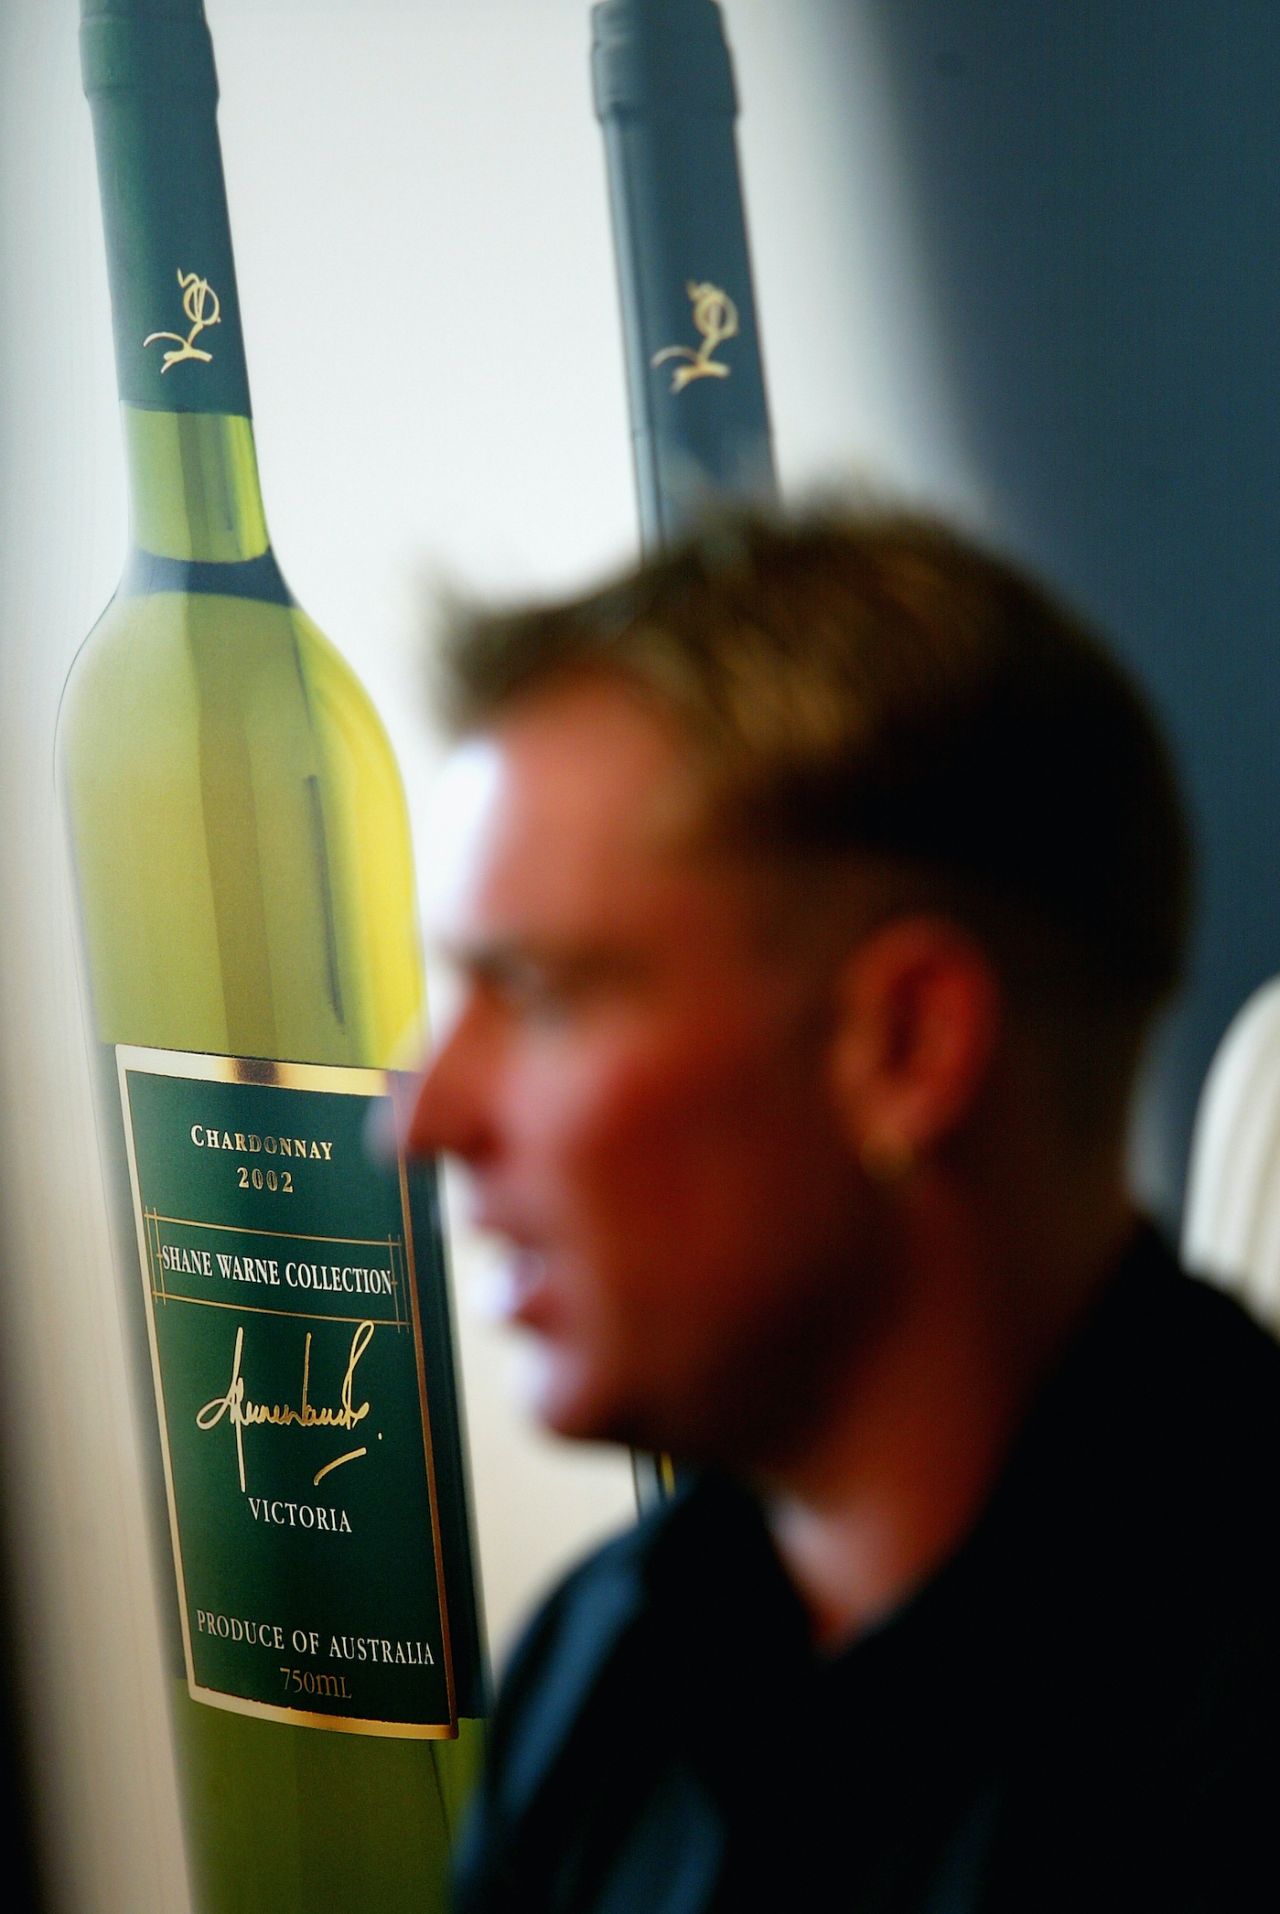 Shane Warne at the launch of a new line of Australian wines in his name, Crown Casino, Melbourne, October 29, 2002.